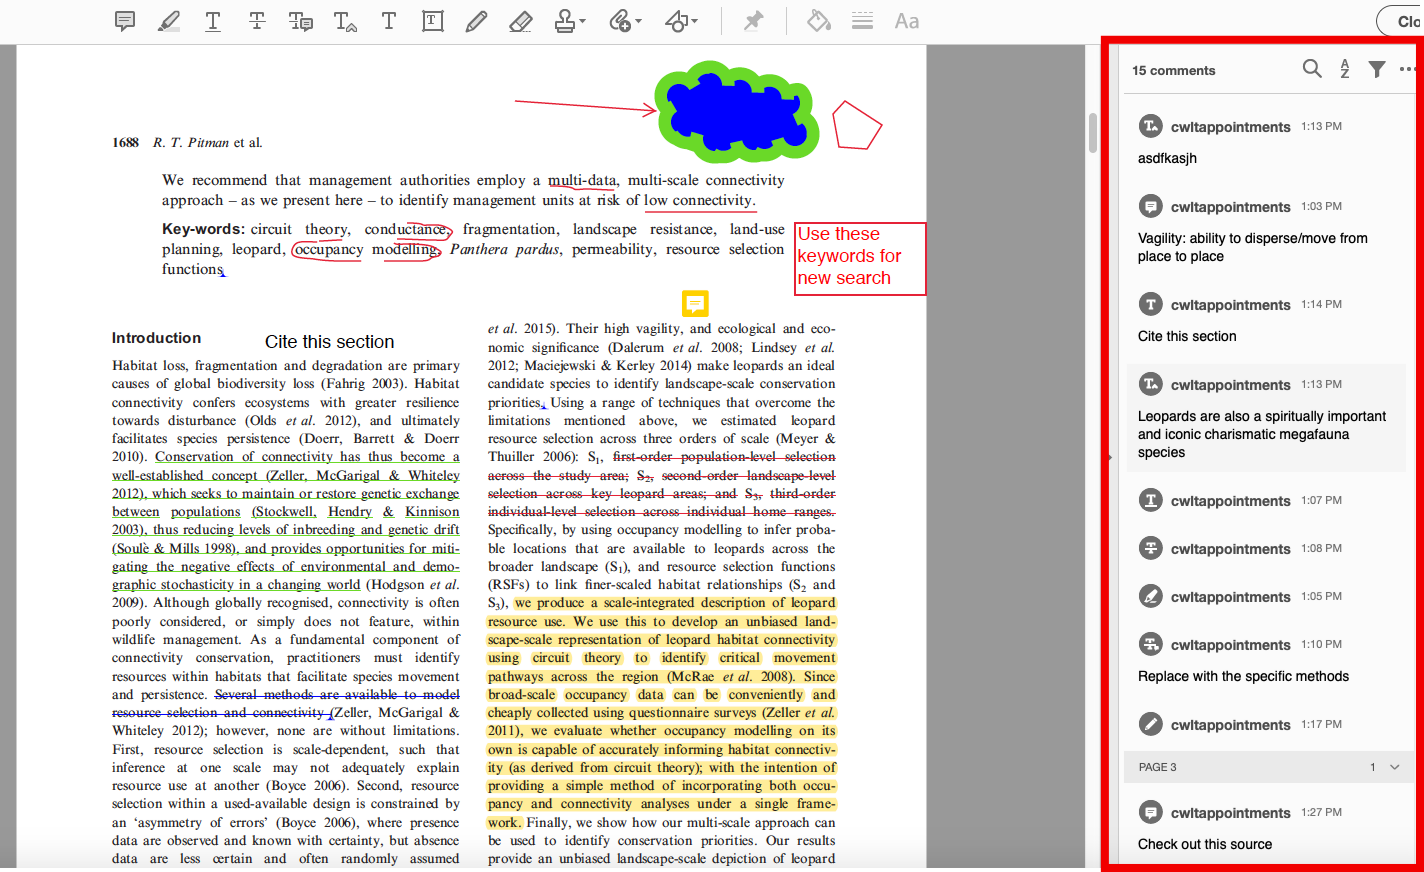 This image shows a screenshot of the same PDF used throughout this section, open in Adobe Acrobat. A bar on the right side of the screen is outlined in red. It shows every modification that has been made to the document, with the name of the user who made the change, time of the change, and icon indicating the type of change. Text of comments or replaced text is also present in this bar.